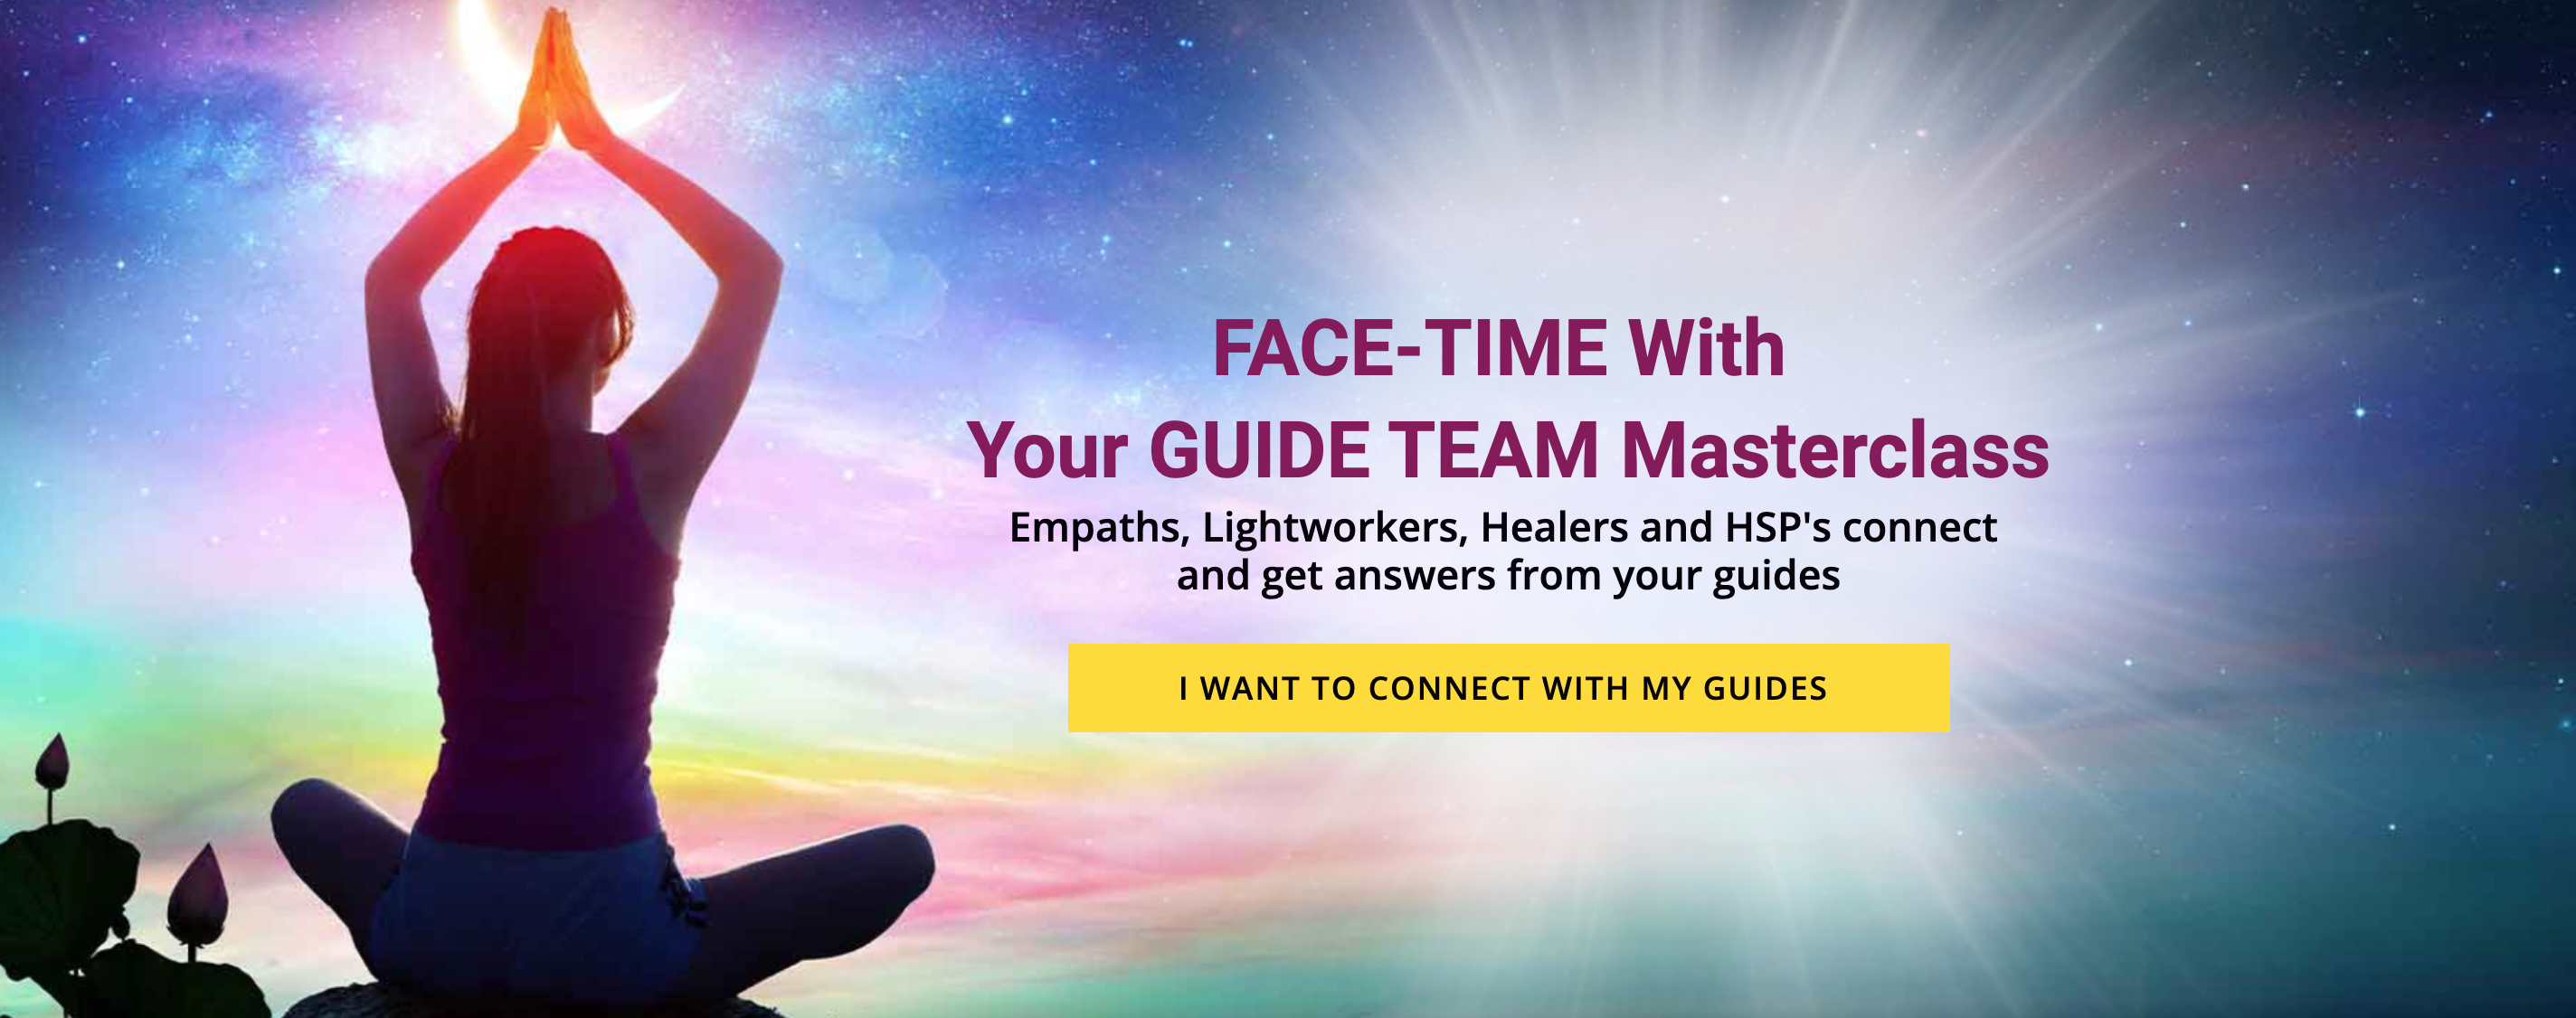 FACE-TIME With Your GUIDE TEAM Masterclass 1